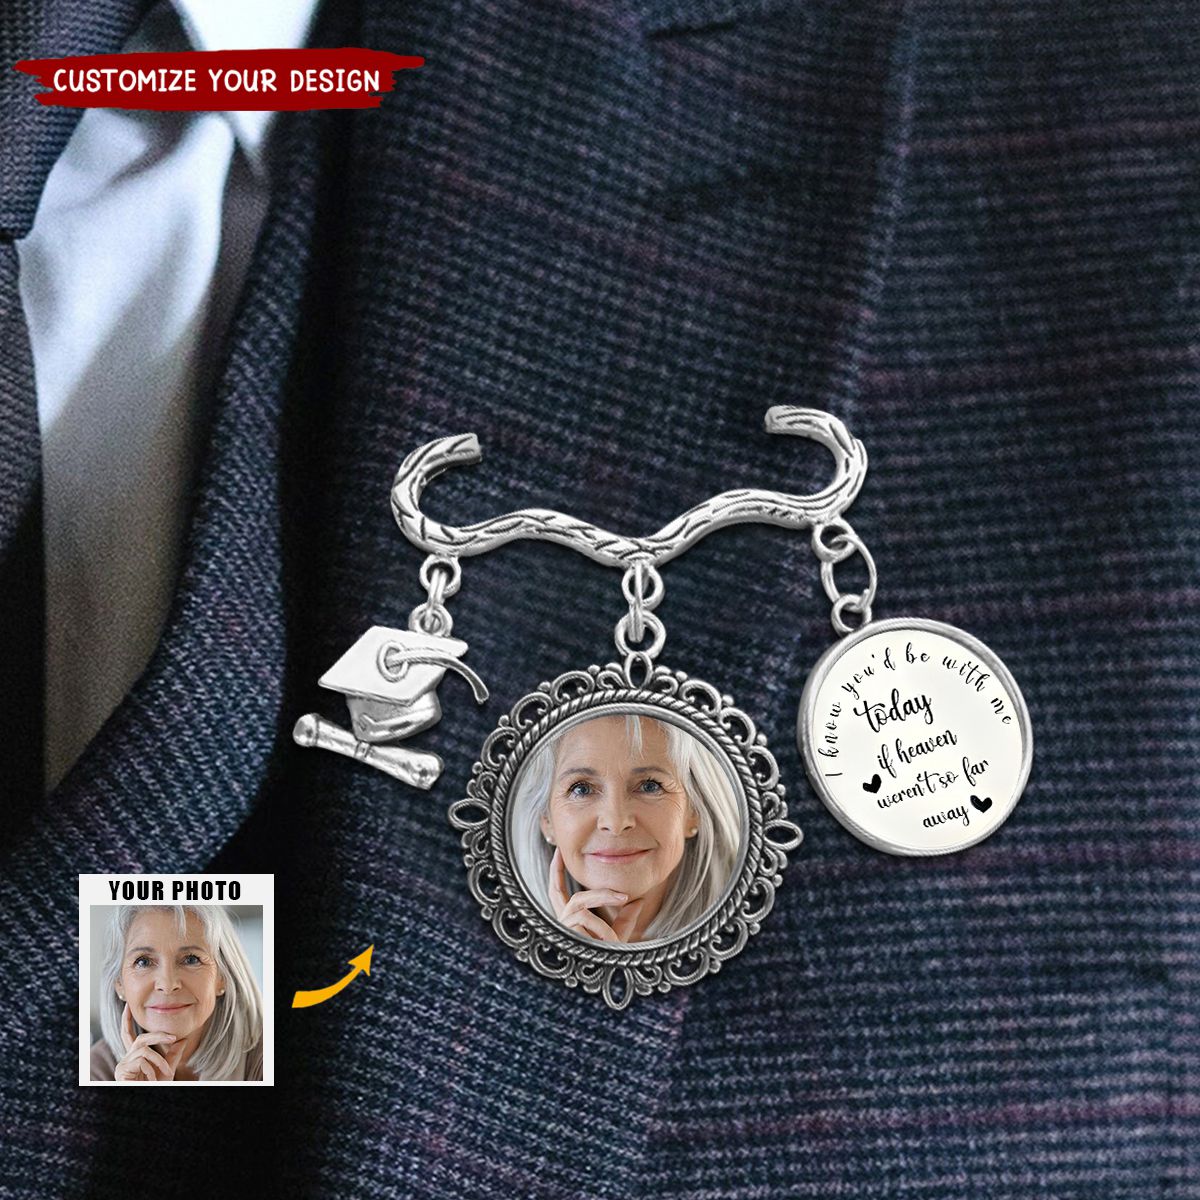 Personalized Antique Graduation Cap Memorial Tassel Brooch Pin with Photo Charm Grad Ceremony Sympathy Gift for Class of 2024 Graduates